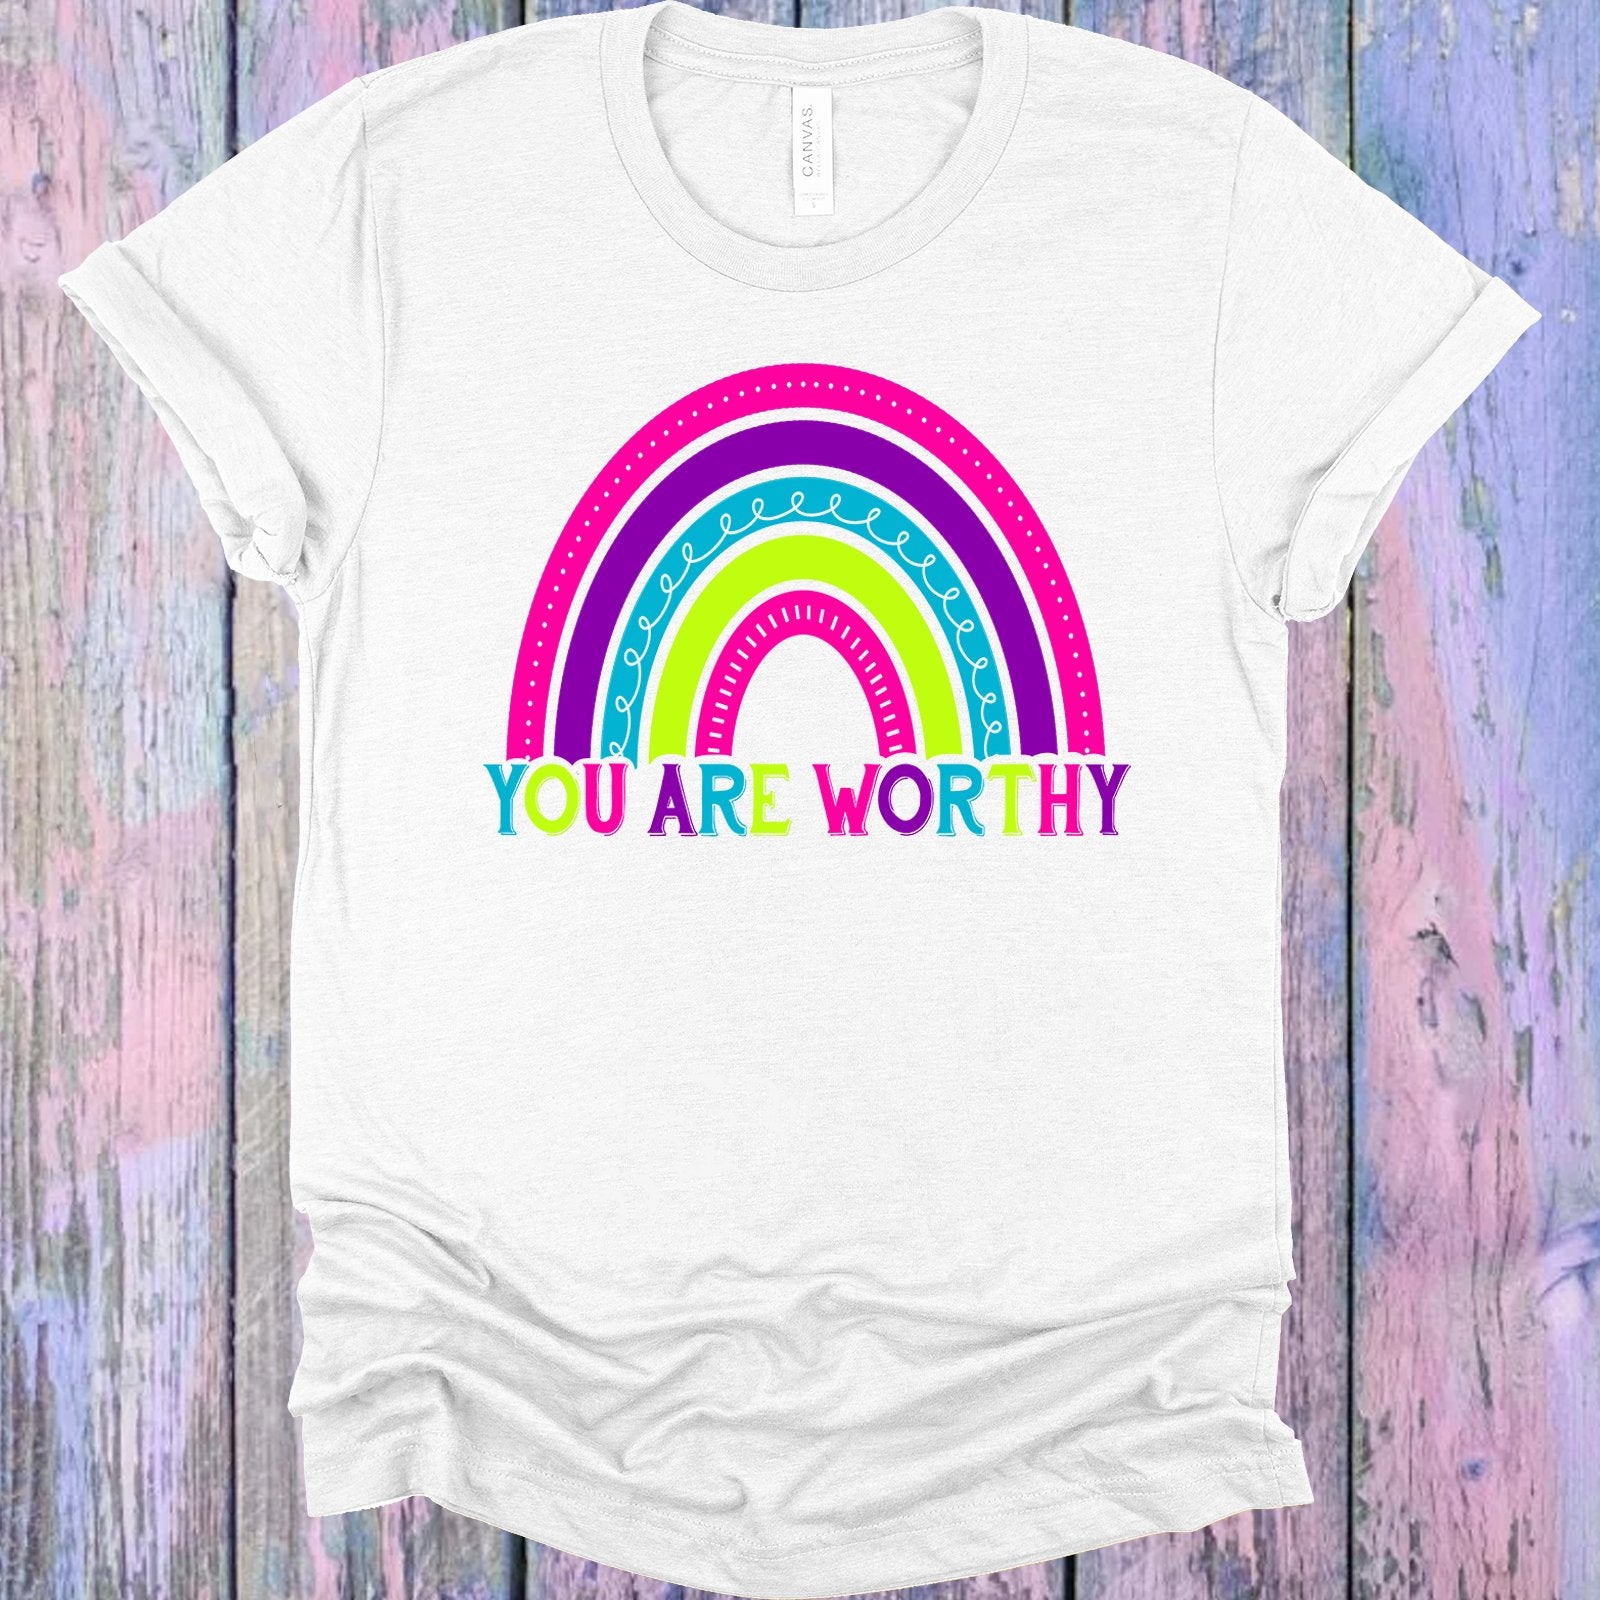 You Are Worthy Graphic Tee Graphic Tee